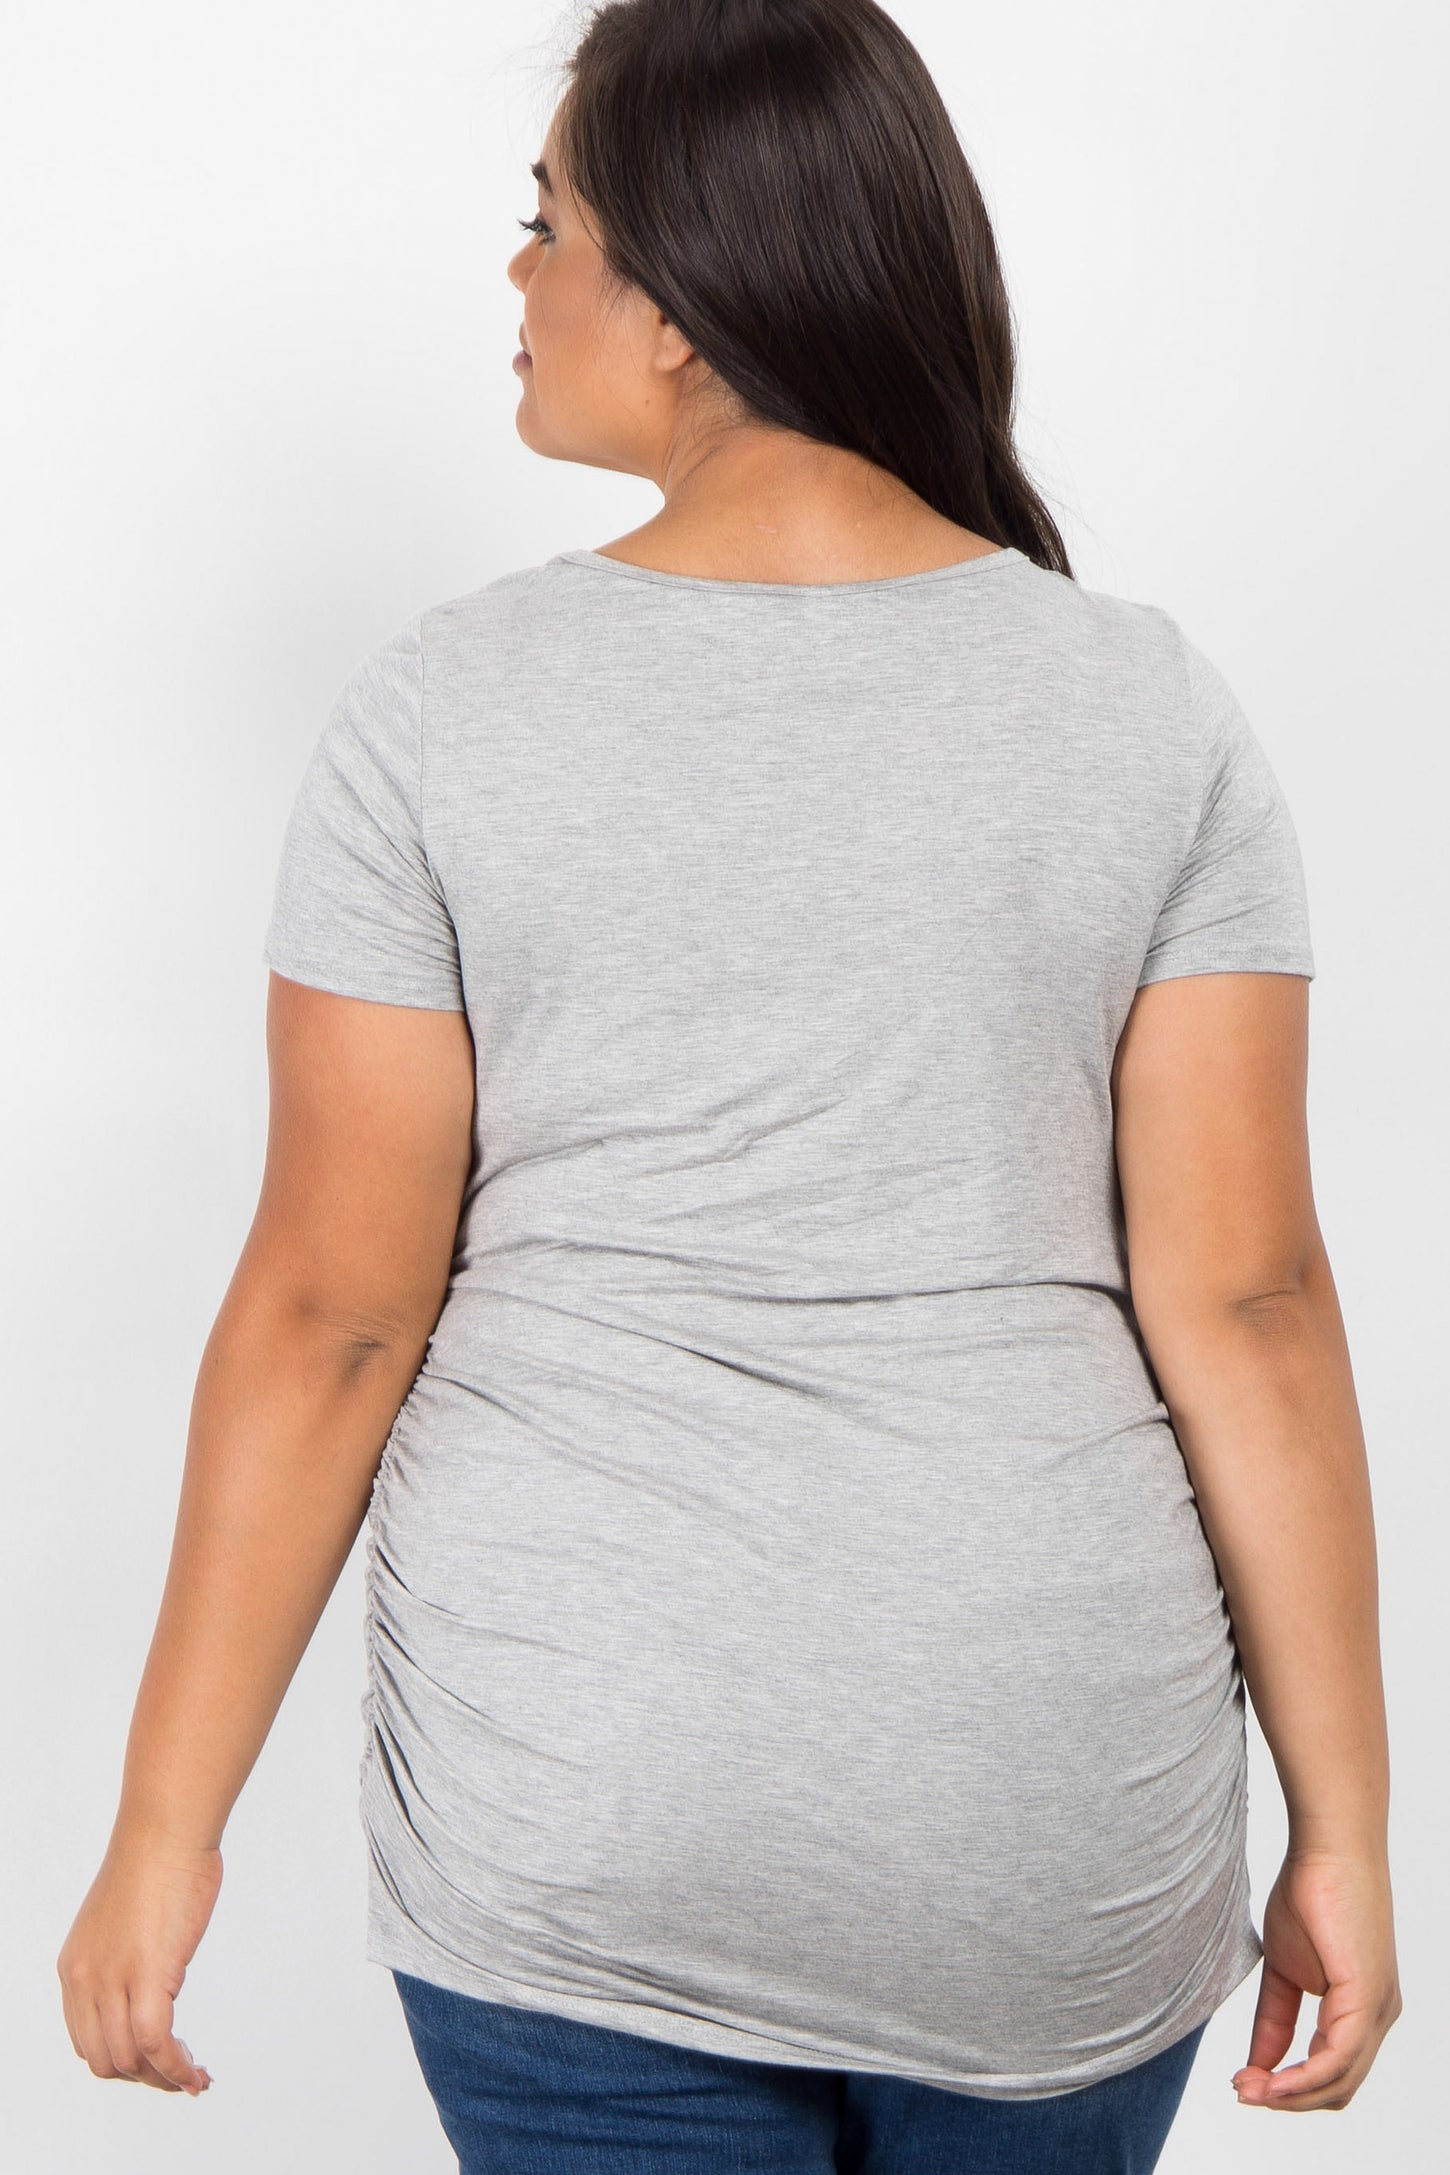 PinkBlush Grey Ruched Short Sleeve Plus Top